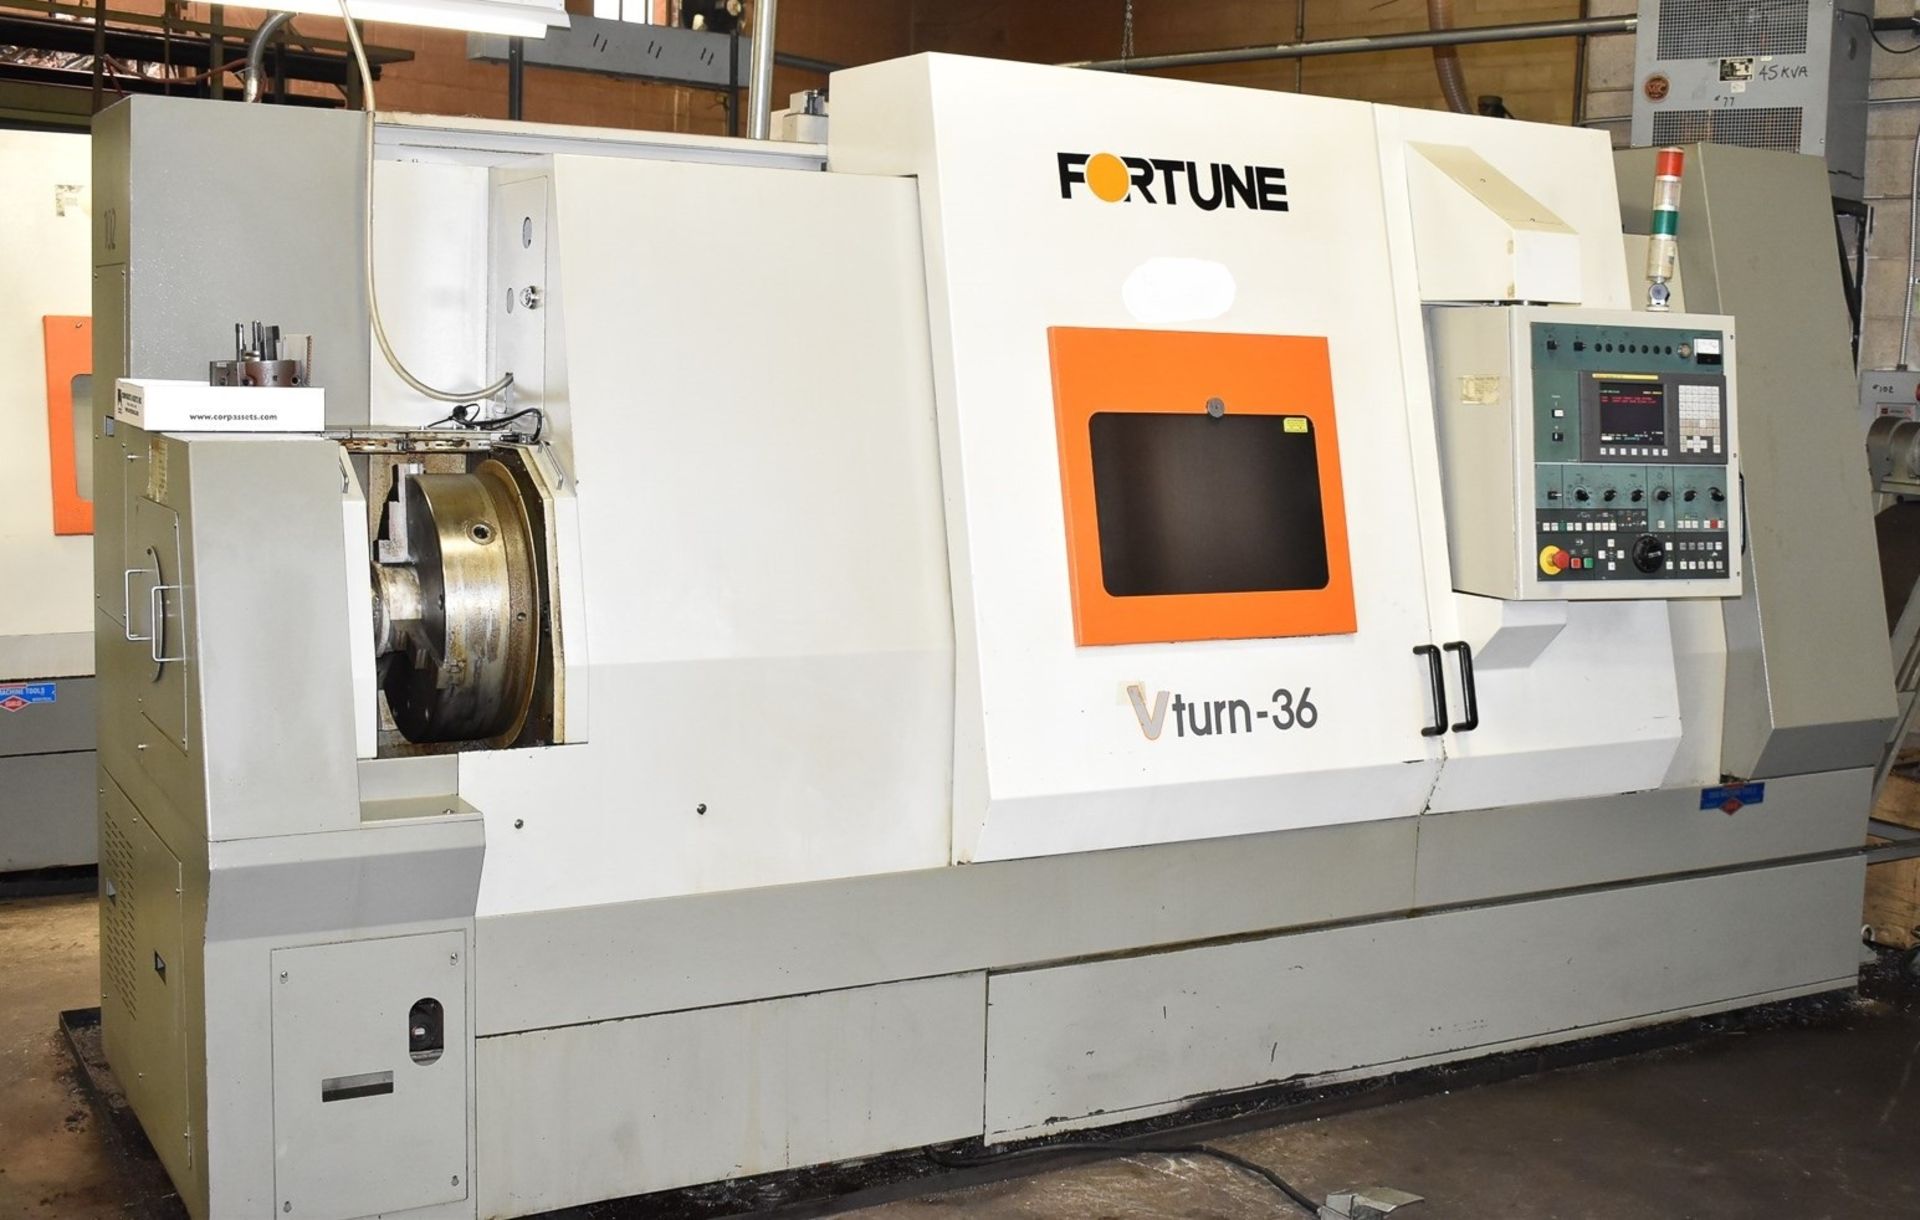 21.65"x35" Victor (Fortune) Mdl VTURN-36 2-Axis CNC Turning Center Lathe, S/N MD-1636, New 2007